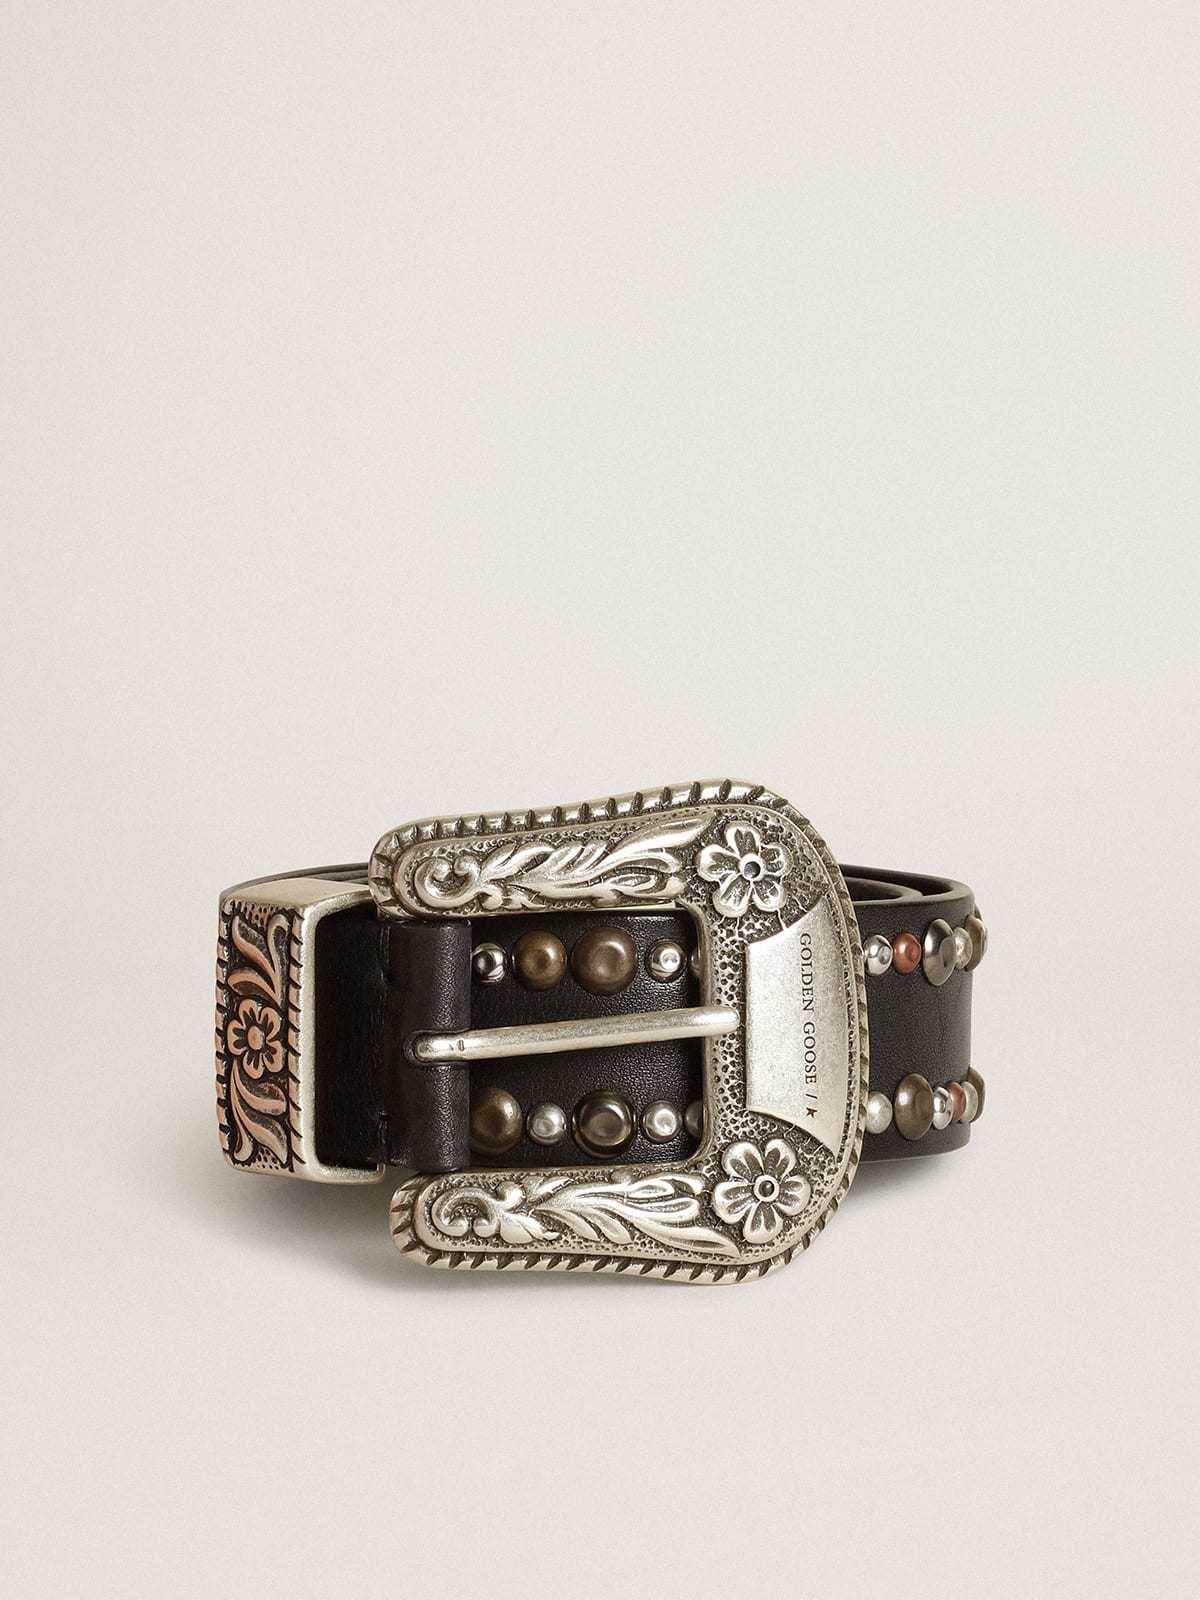 Lace belt in black leather with colored studs